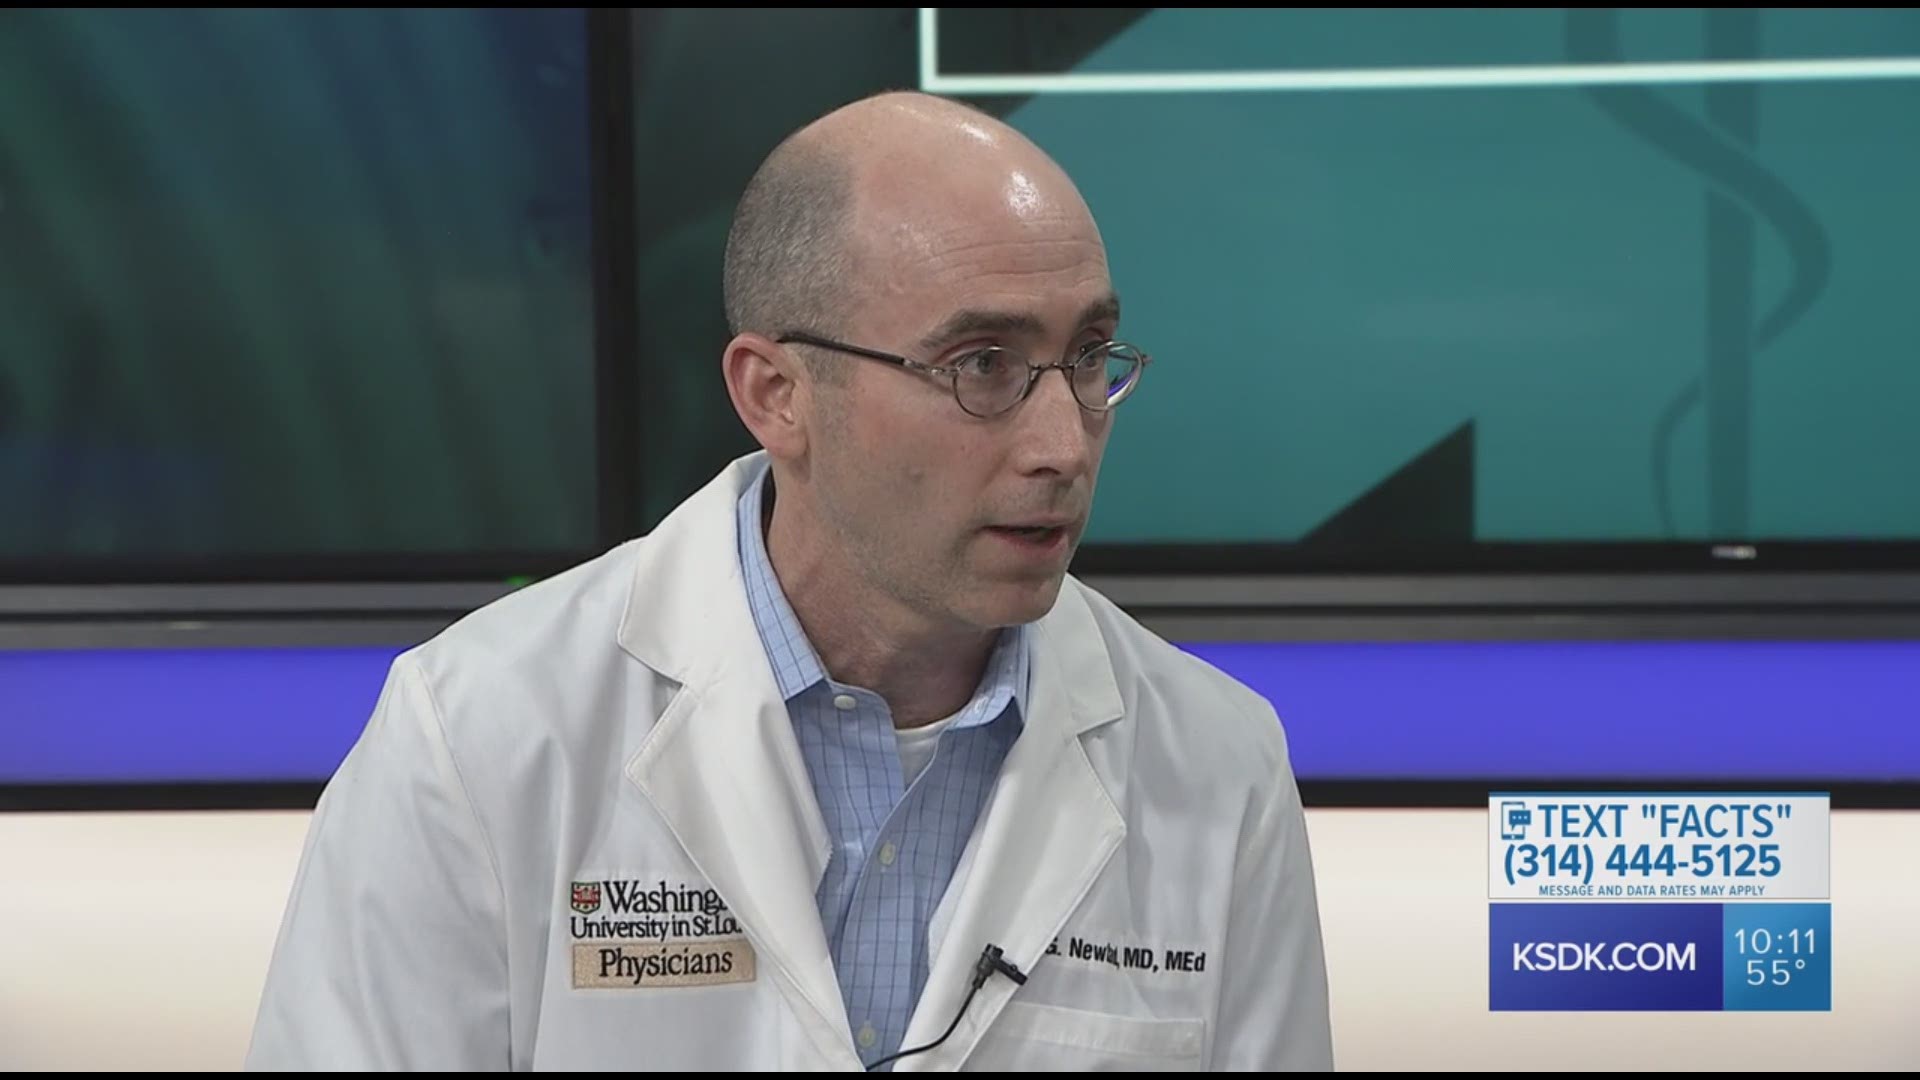 Dr. Jason Newland, an infectious disease specialist with Washington University answers some of the top coronavirus questions from viewers.